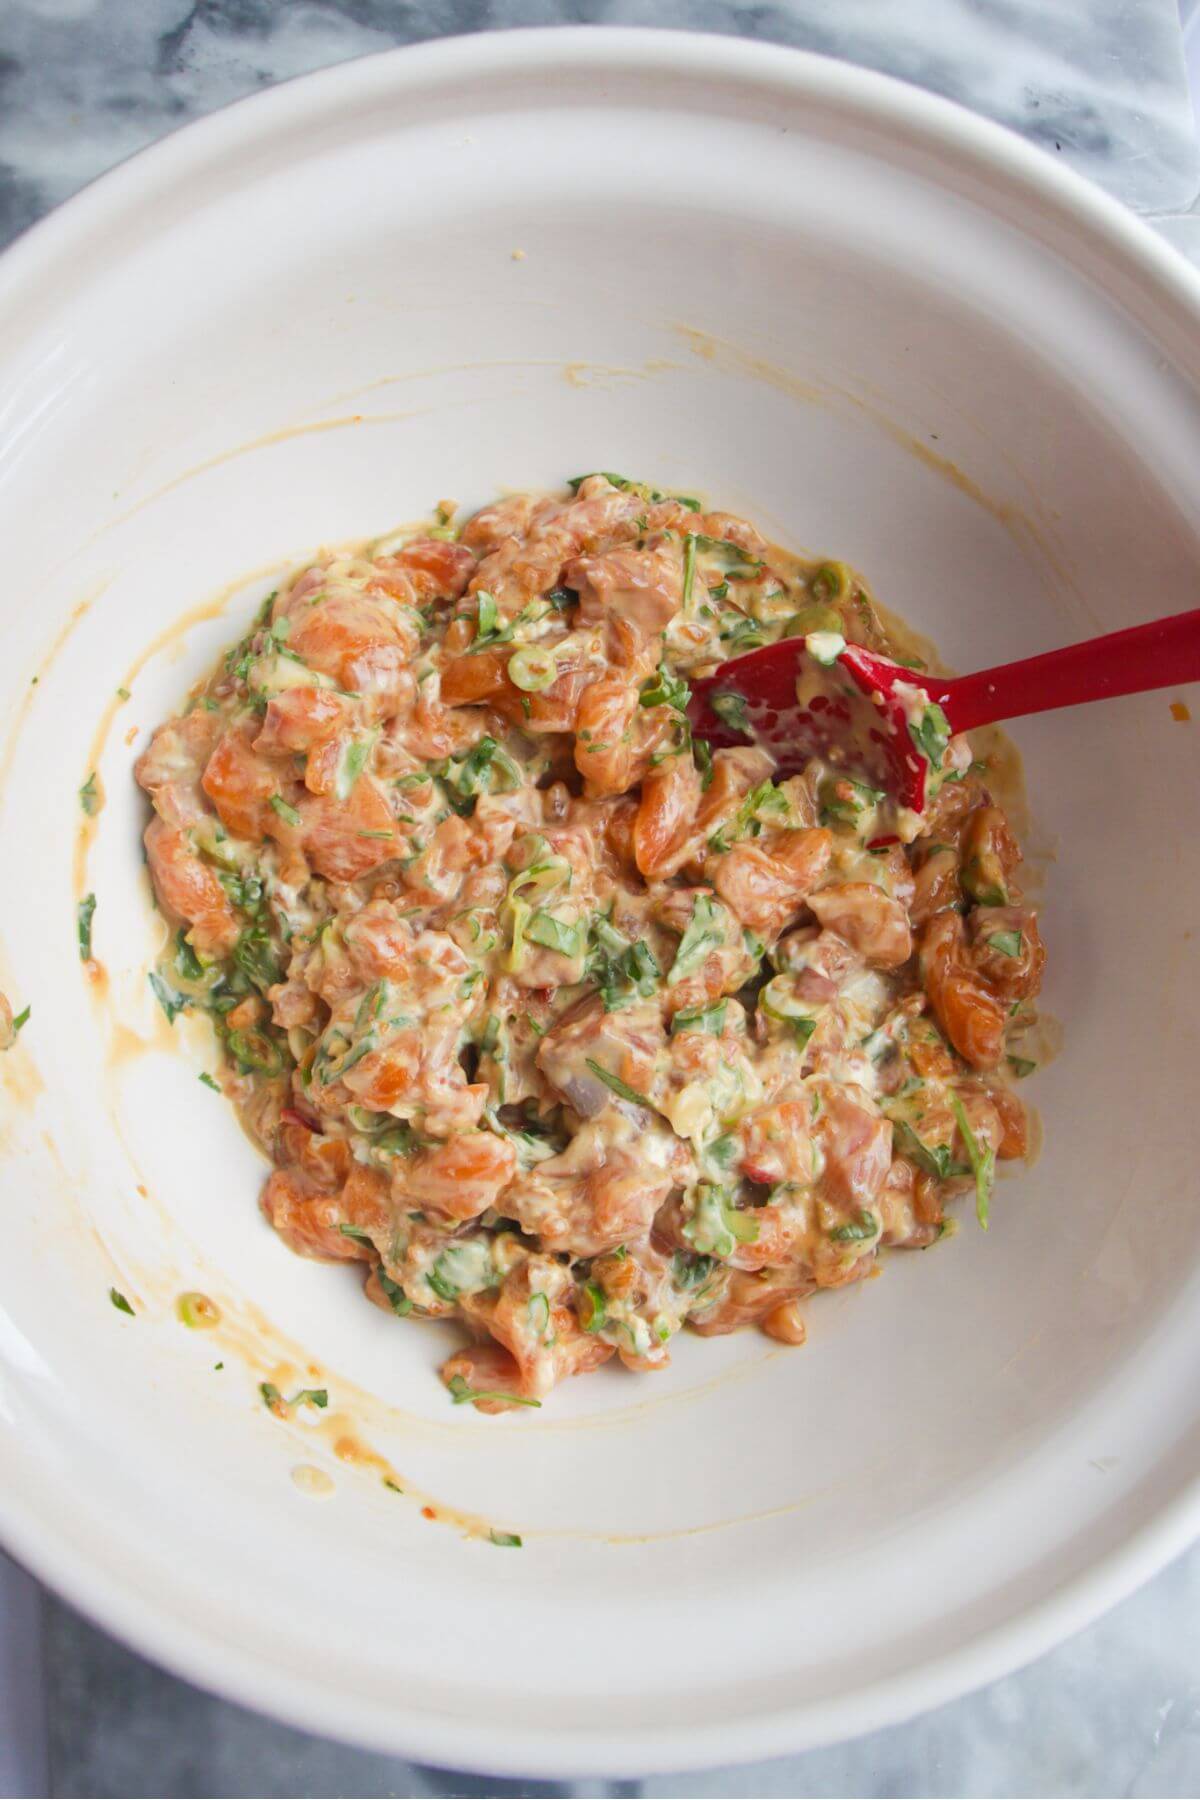 Salmon sushi mix in a large white mixing bowl.